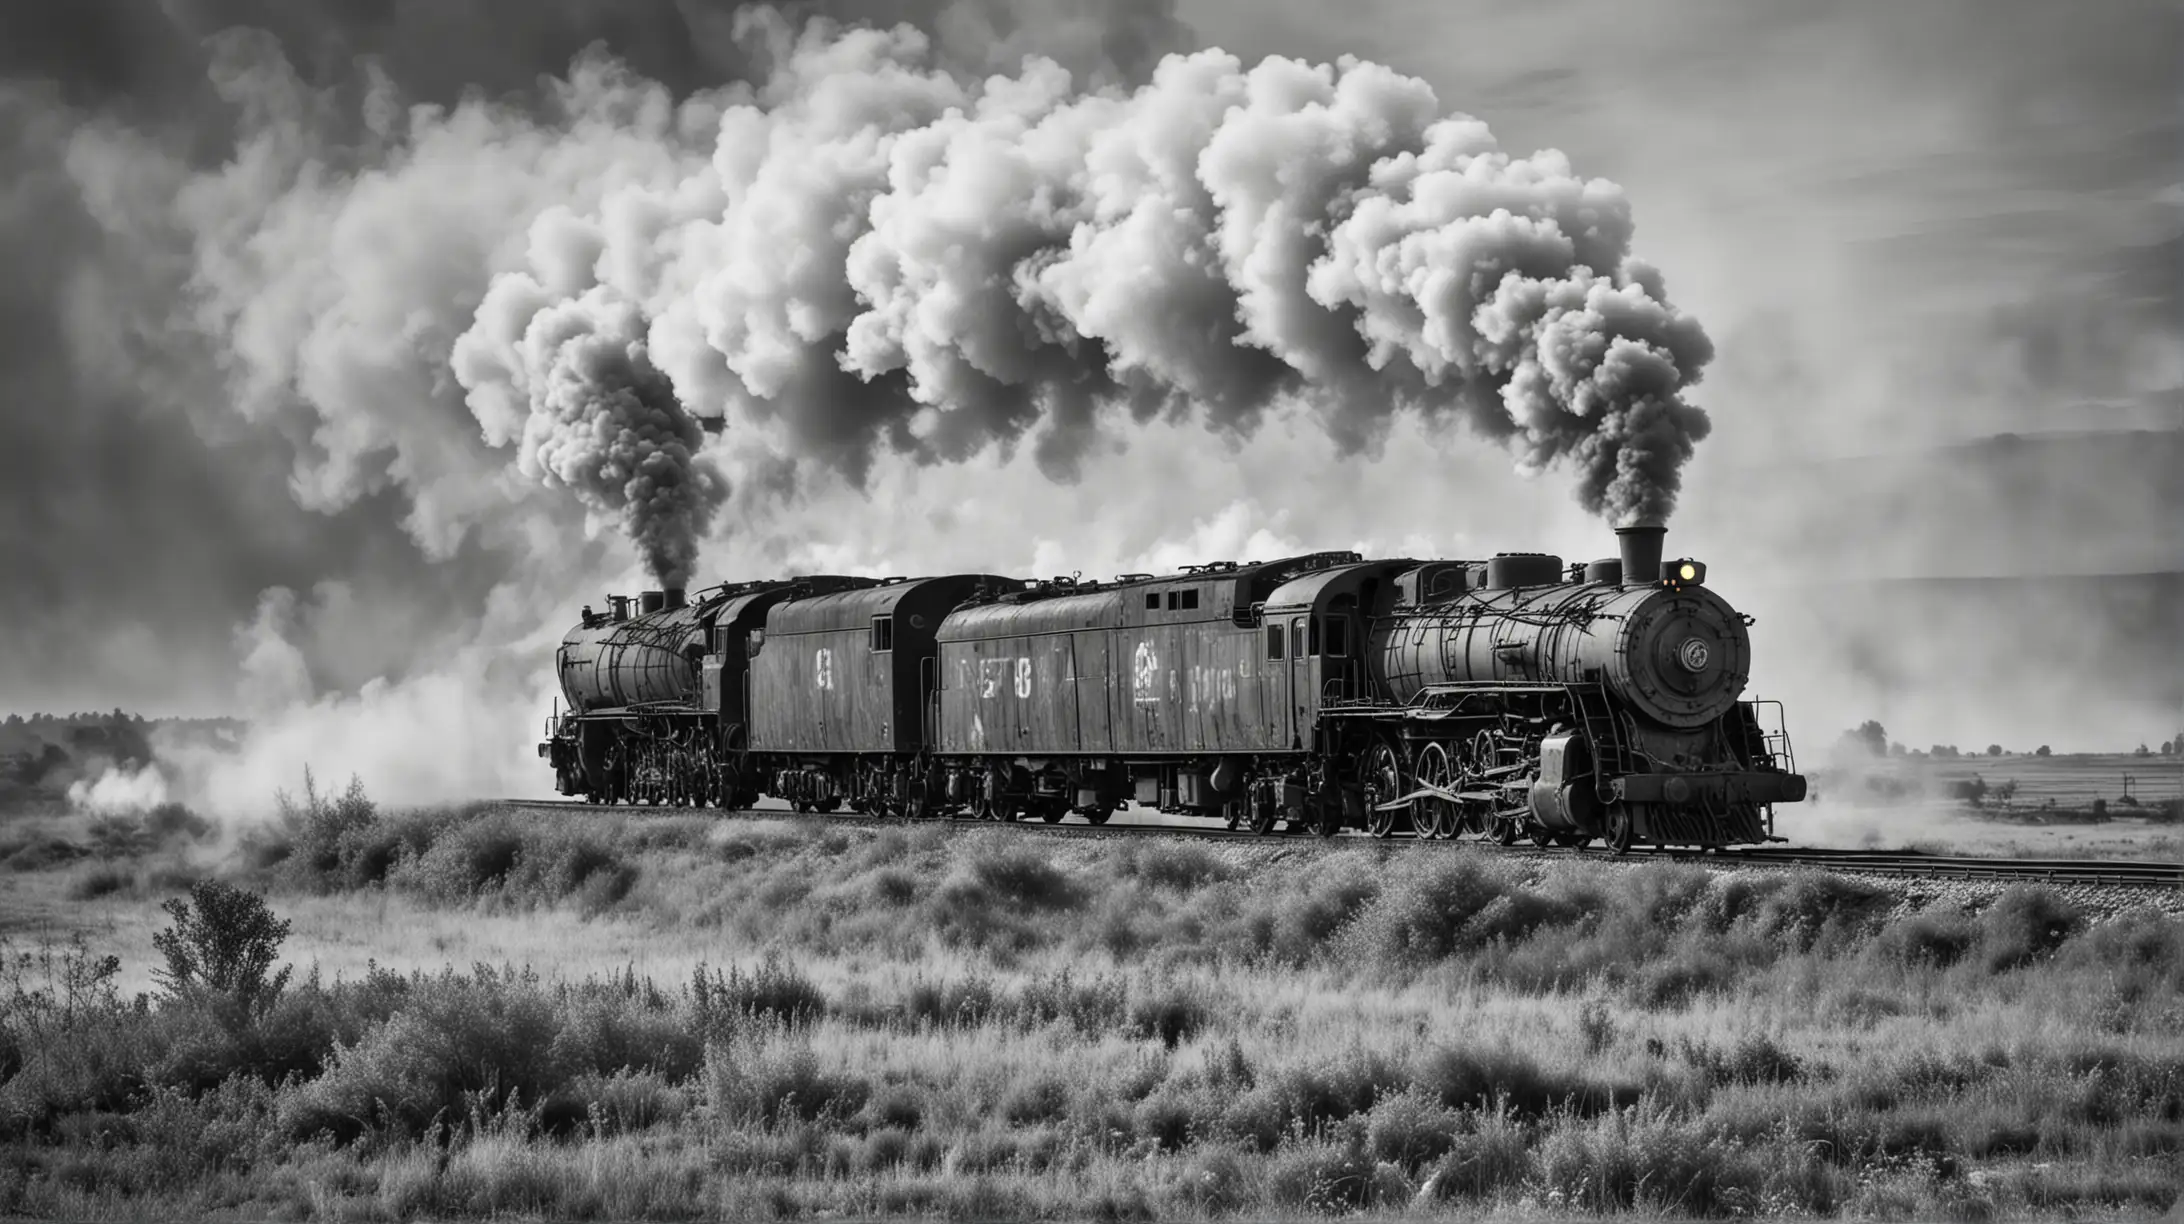 Vintage Steam Train Traveling Through Grungy Black and White Landscape with Billowing Smoke